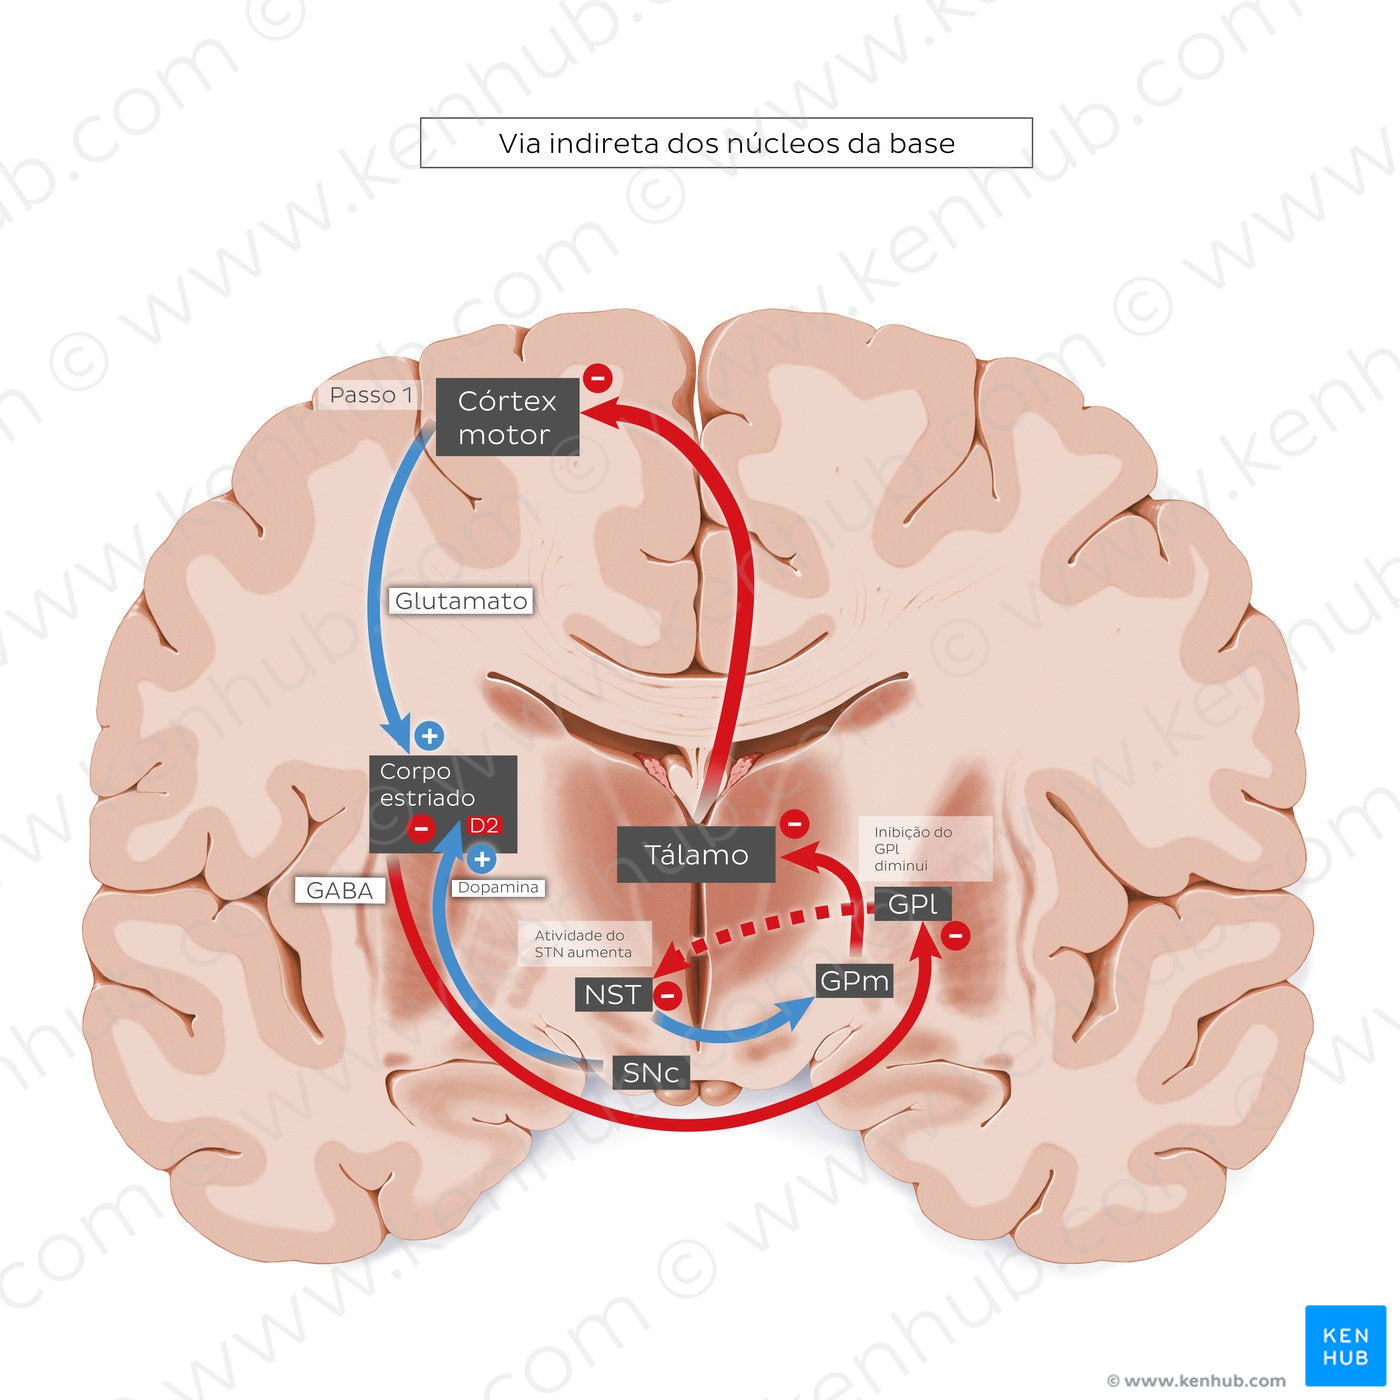 Indirect pathway of the basal ganglia (Portuguese)